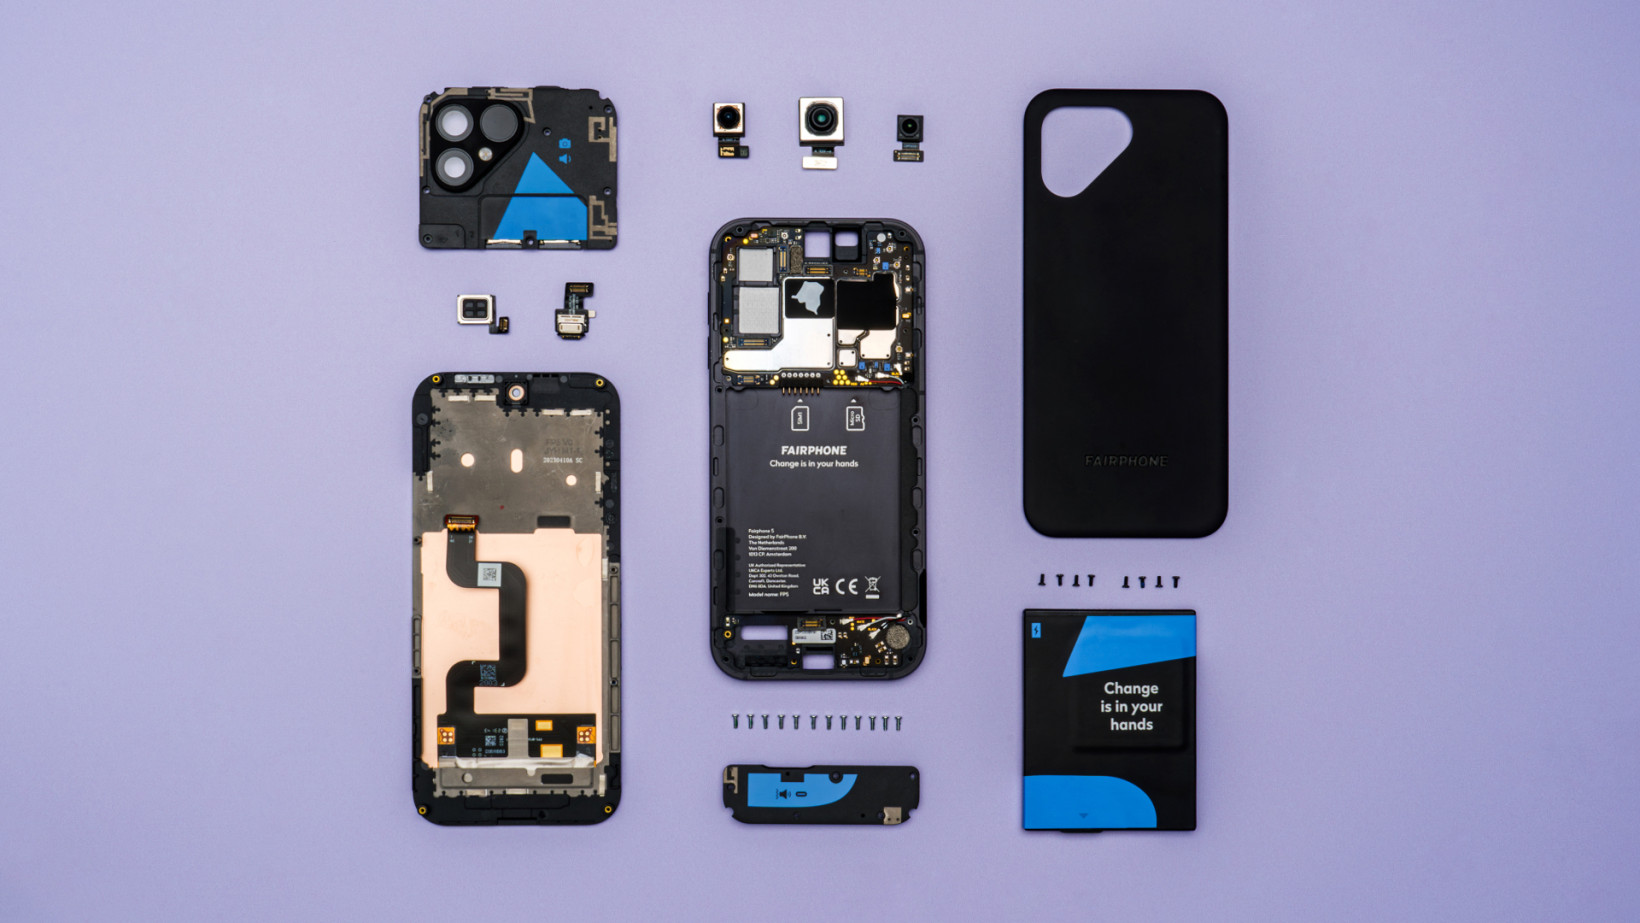 All the modular components of the Fairphone 5